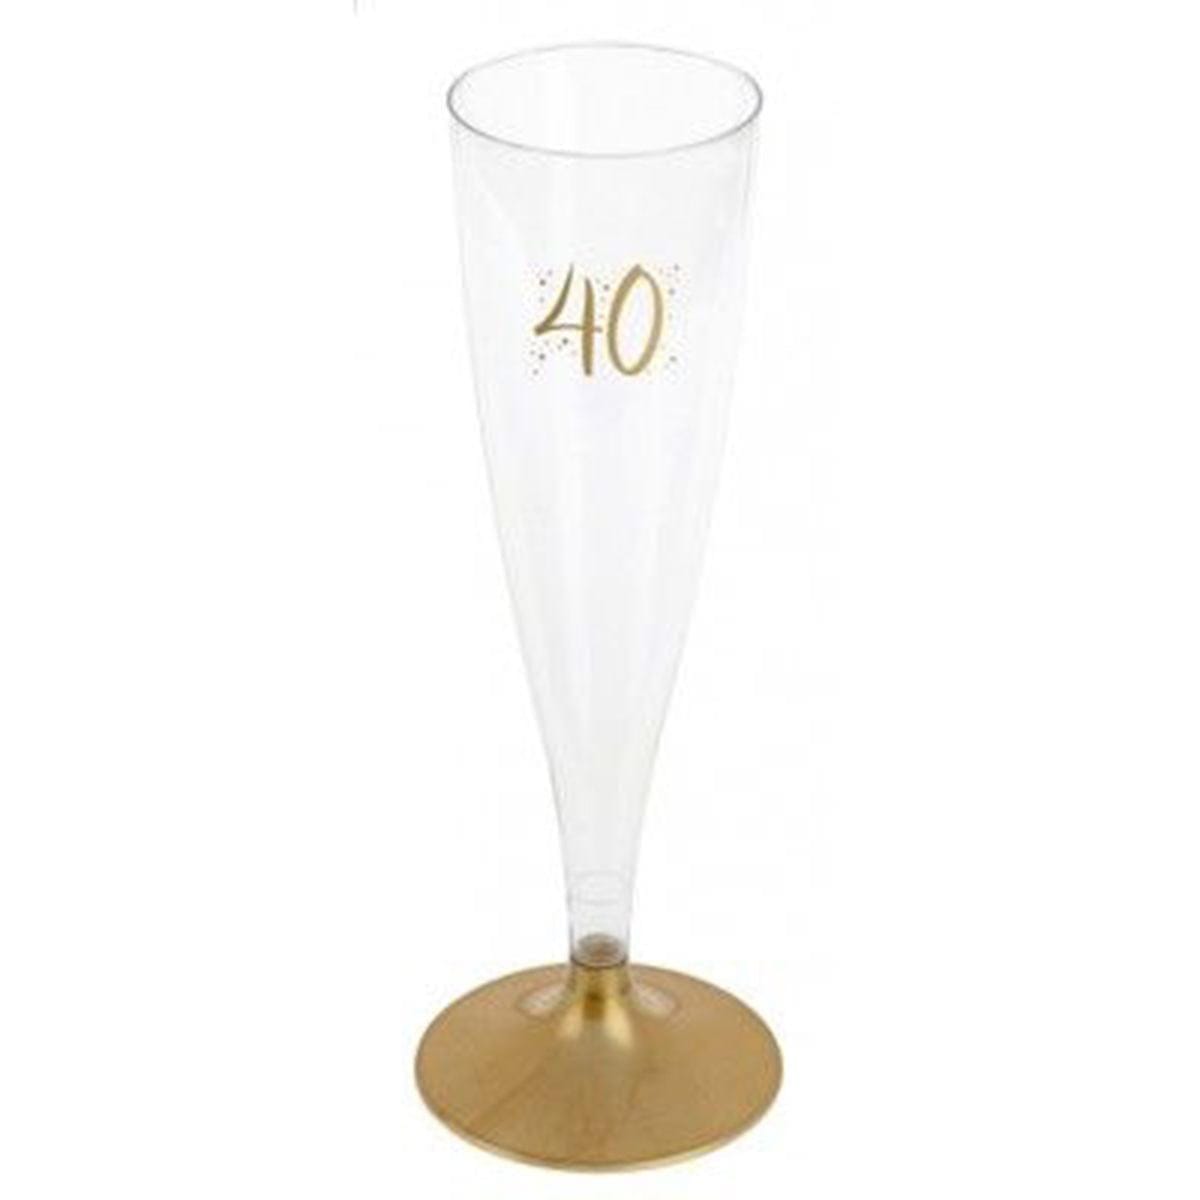 SANTEX Age Specific Birthday 40th Birthday Champagne Flute, Gold, 6 Count